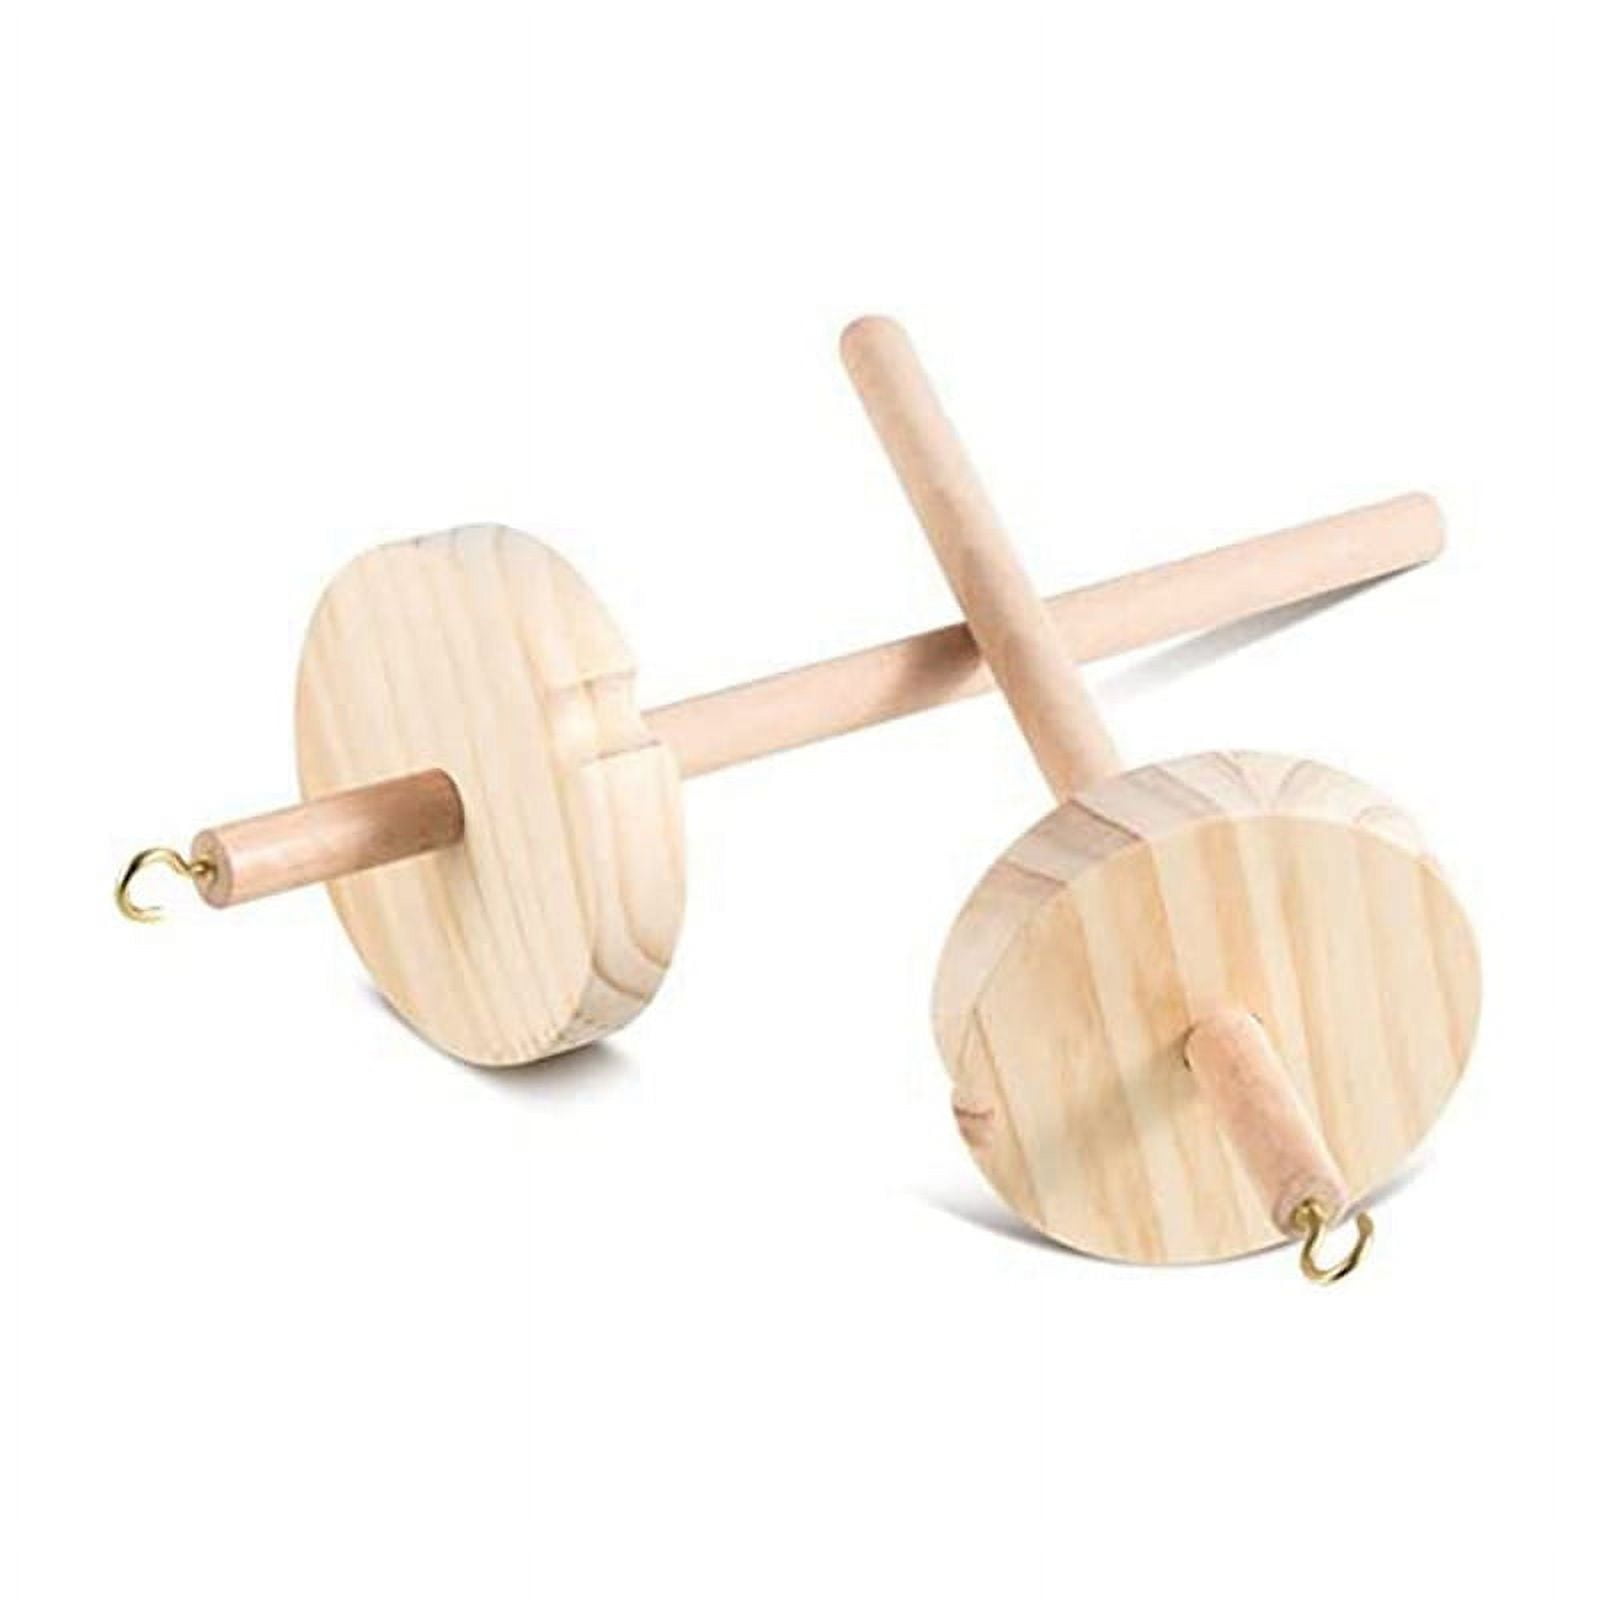  Drop Spindle Yarn Spinner for Crocheting Top Whorl